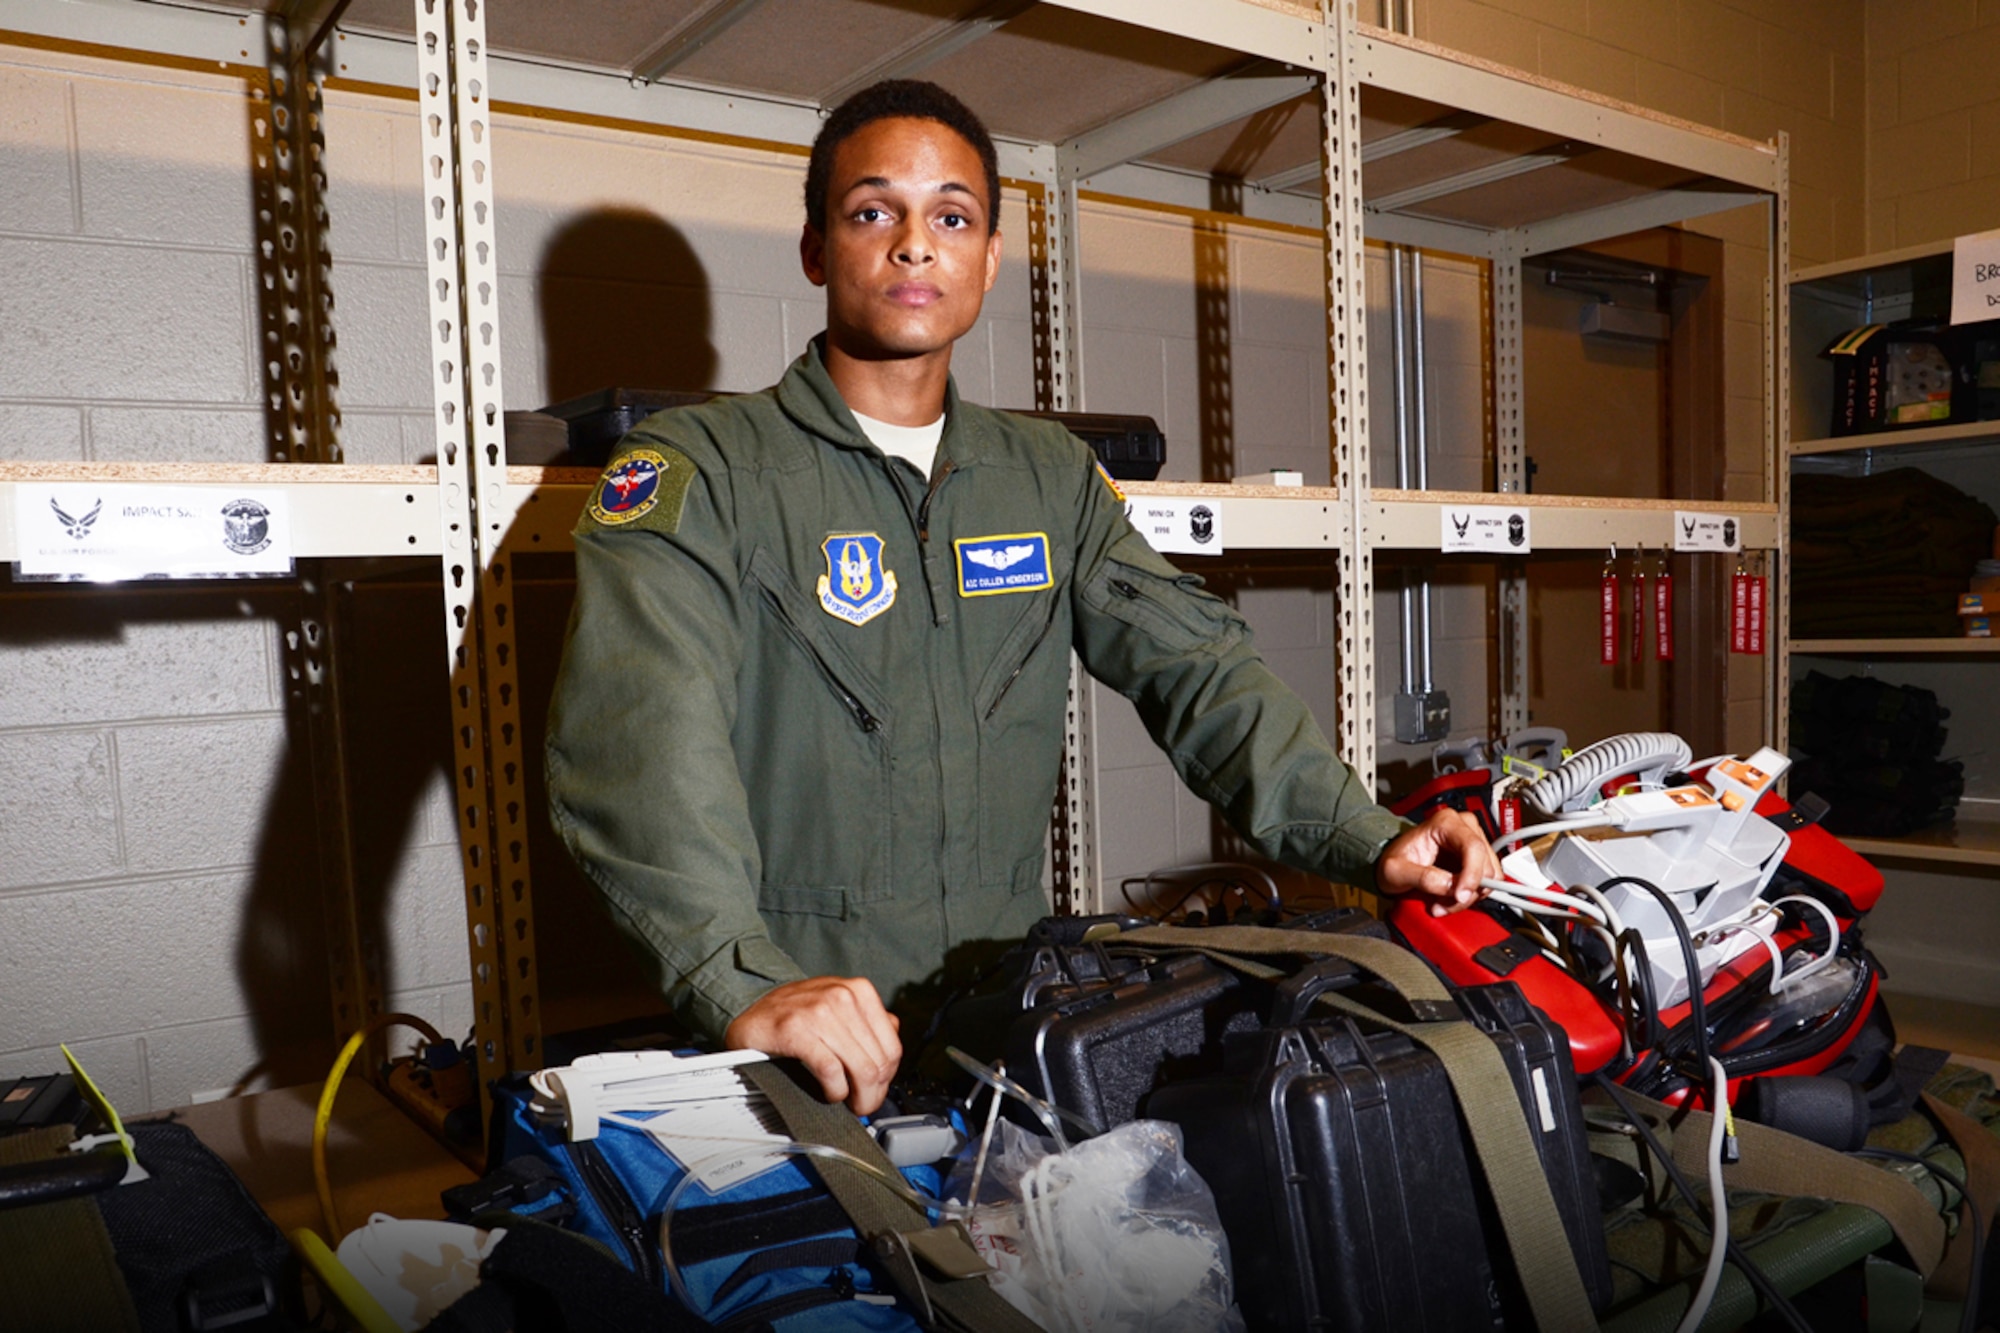 Airman 1st Class Cullen Henderson is a 94th Aeromedical Evacuation Squadron aerospace medical technician. As a flyer, he transports and sustains the lives of patients in need of medical attention.